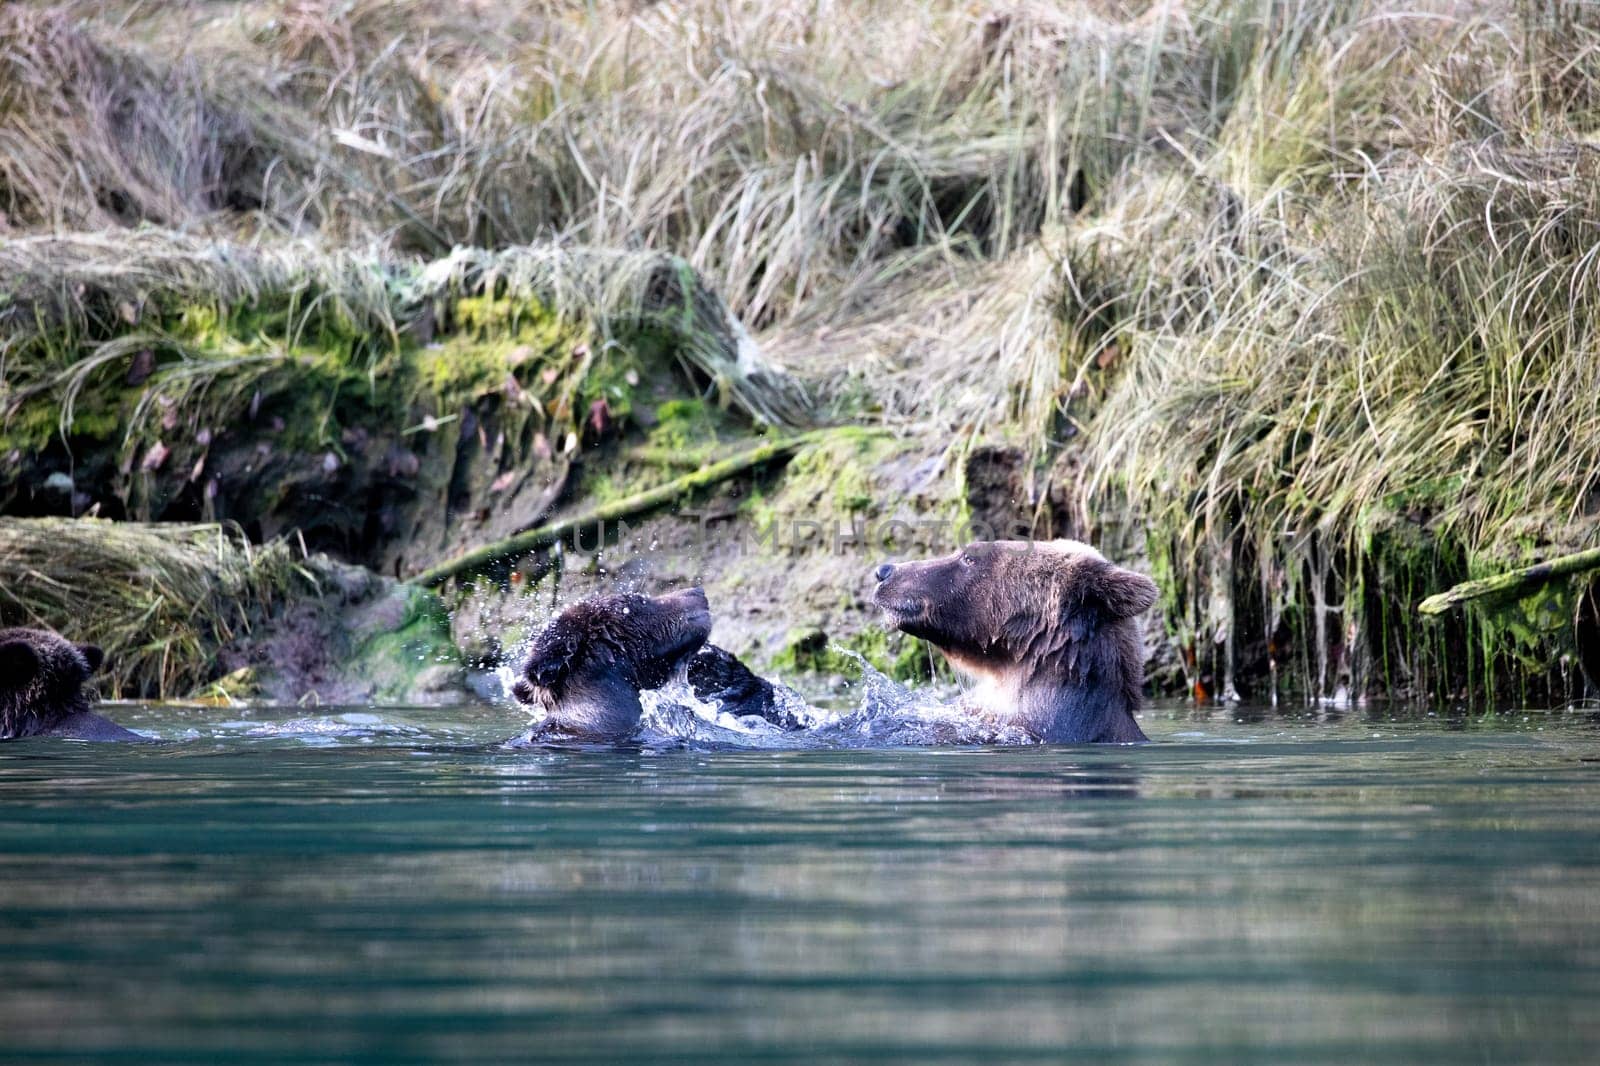 Grizzly bear mom and cub playing around the river bank of Khutze River by Granchinho